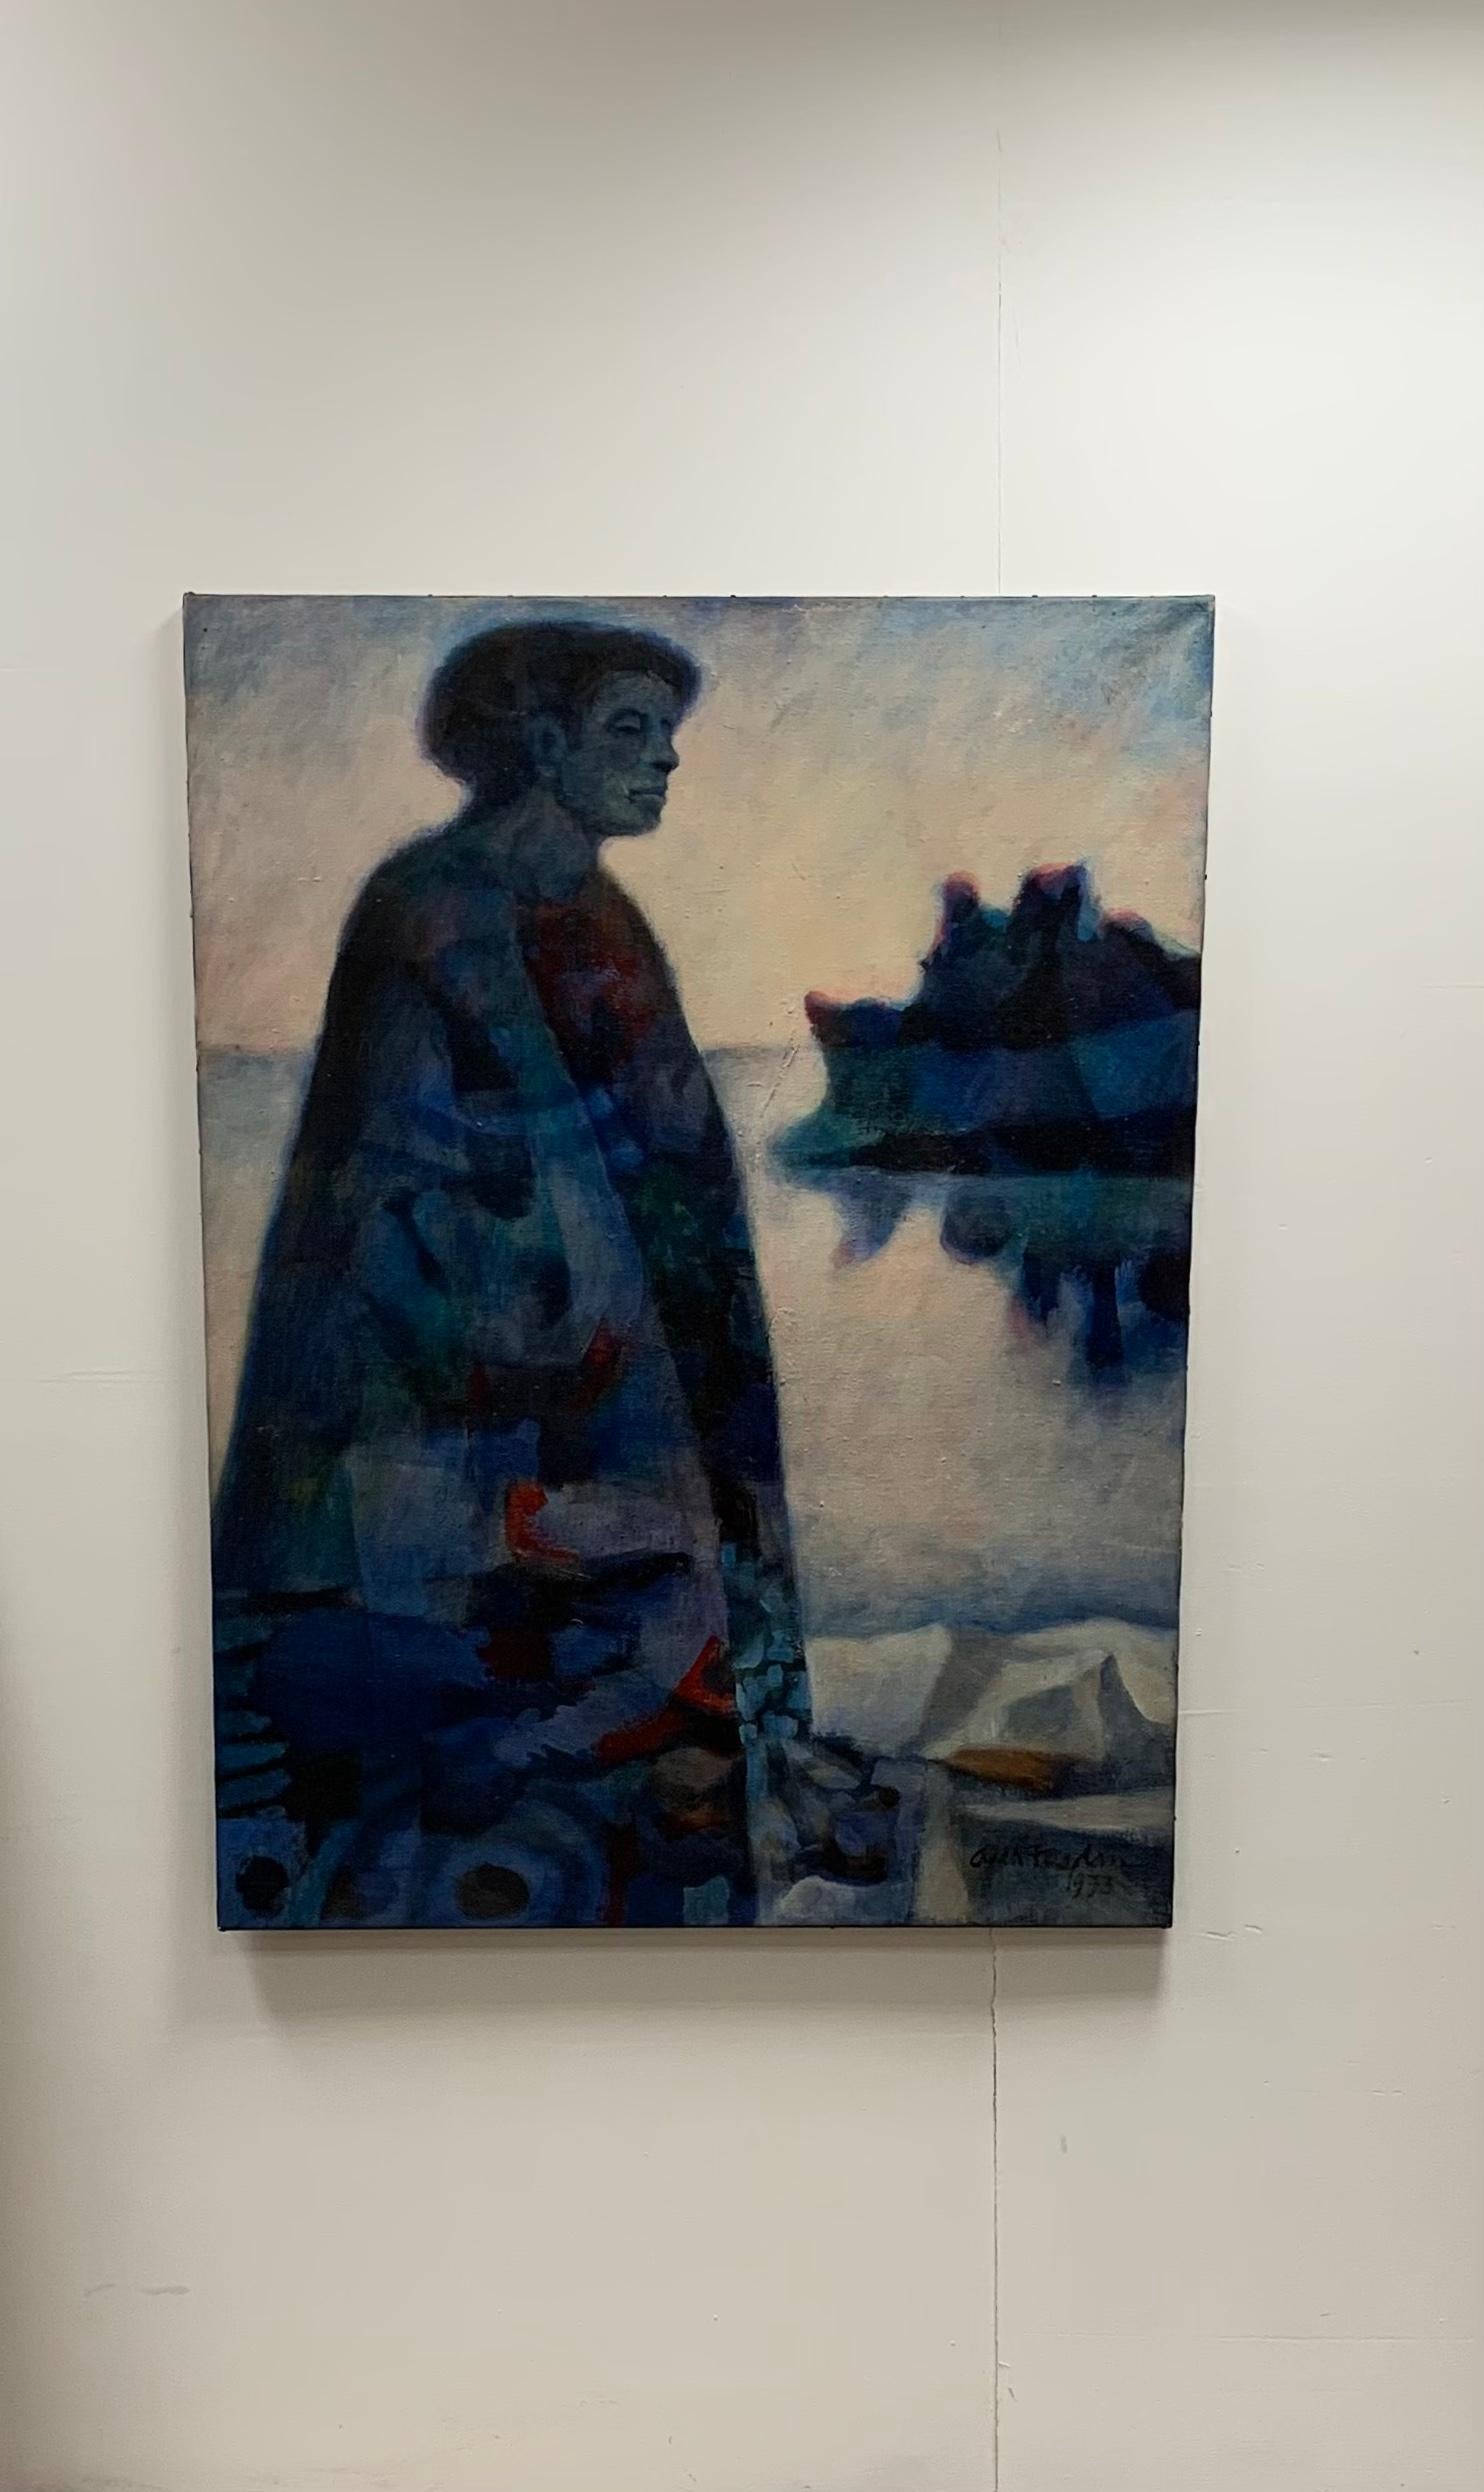 An impressive large scale unframed mixed media oil & acrylic painting by South African artist Cyril Fradan (1928-1997).
The subject is a figure of a man standing on a rocky coastline wearing a long abstract patterned cape.
The work is painted mainly